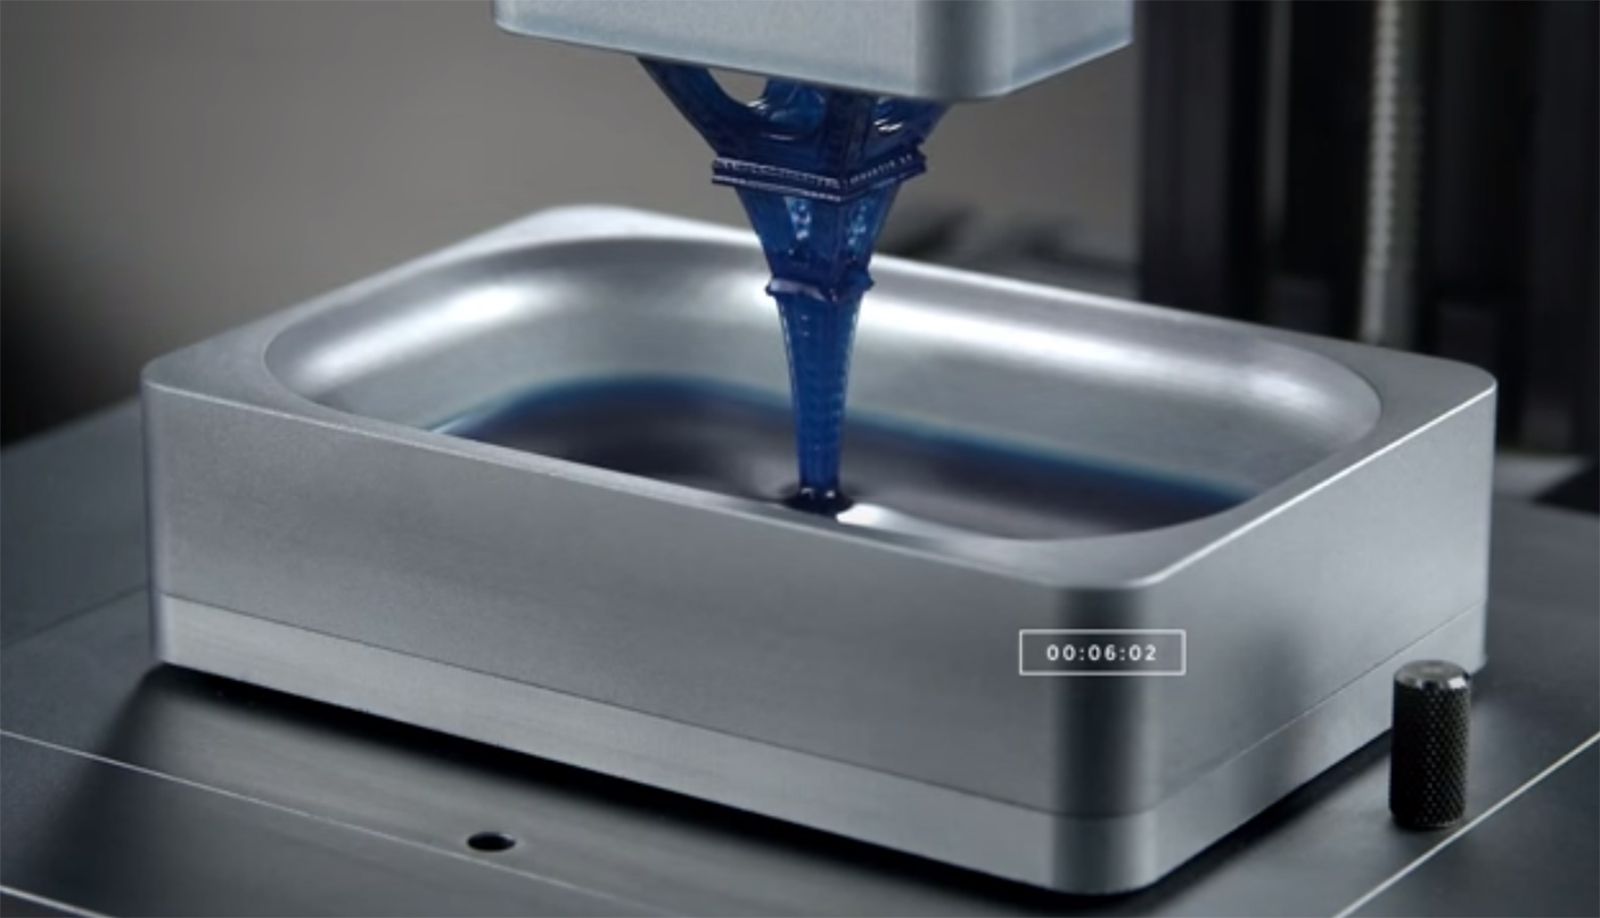 until now 3d printing was just layered 2d carbon3d changes everything image 1